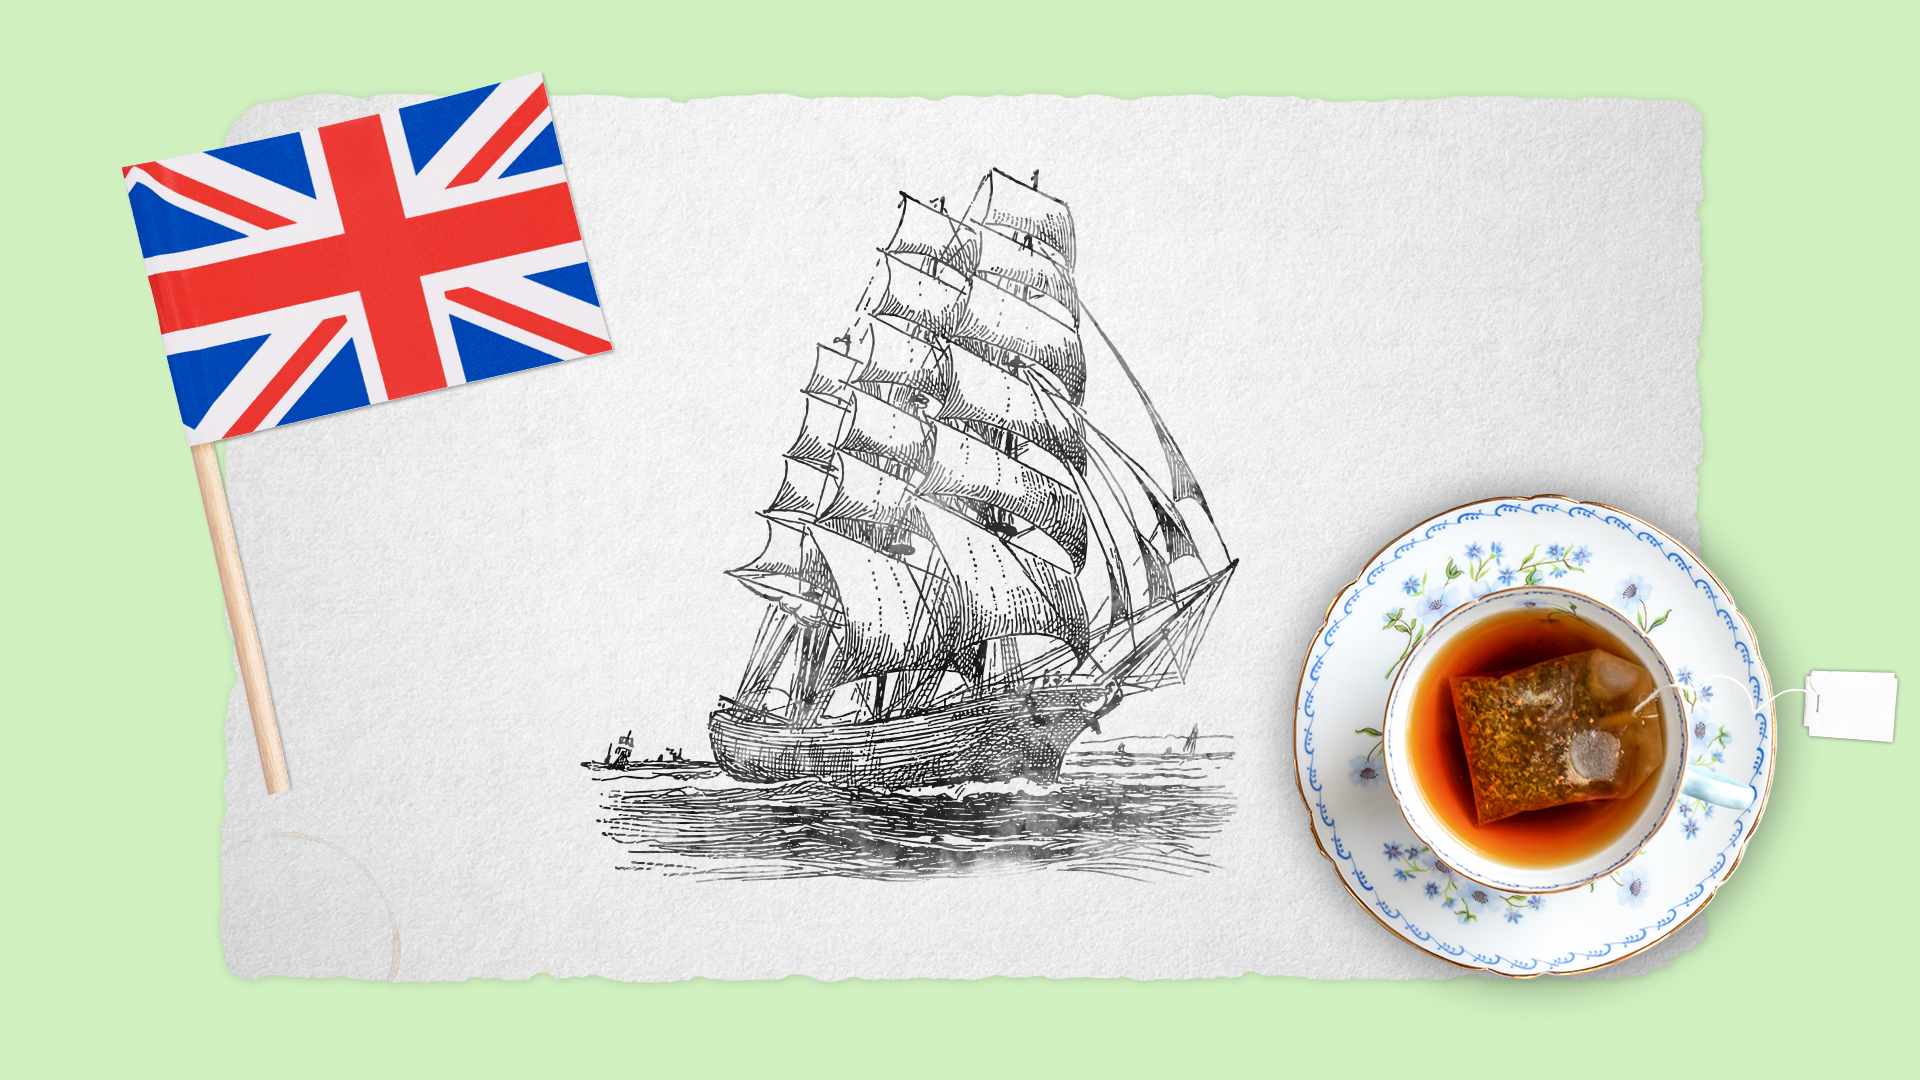 An illustration of a British ship at sea to symbolise the British empire.